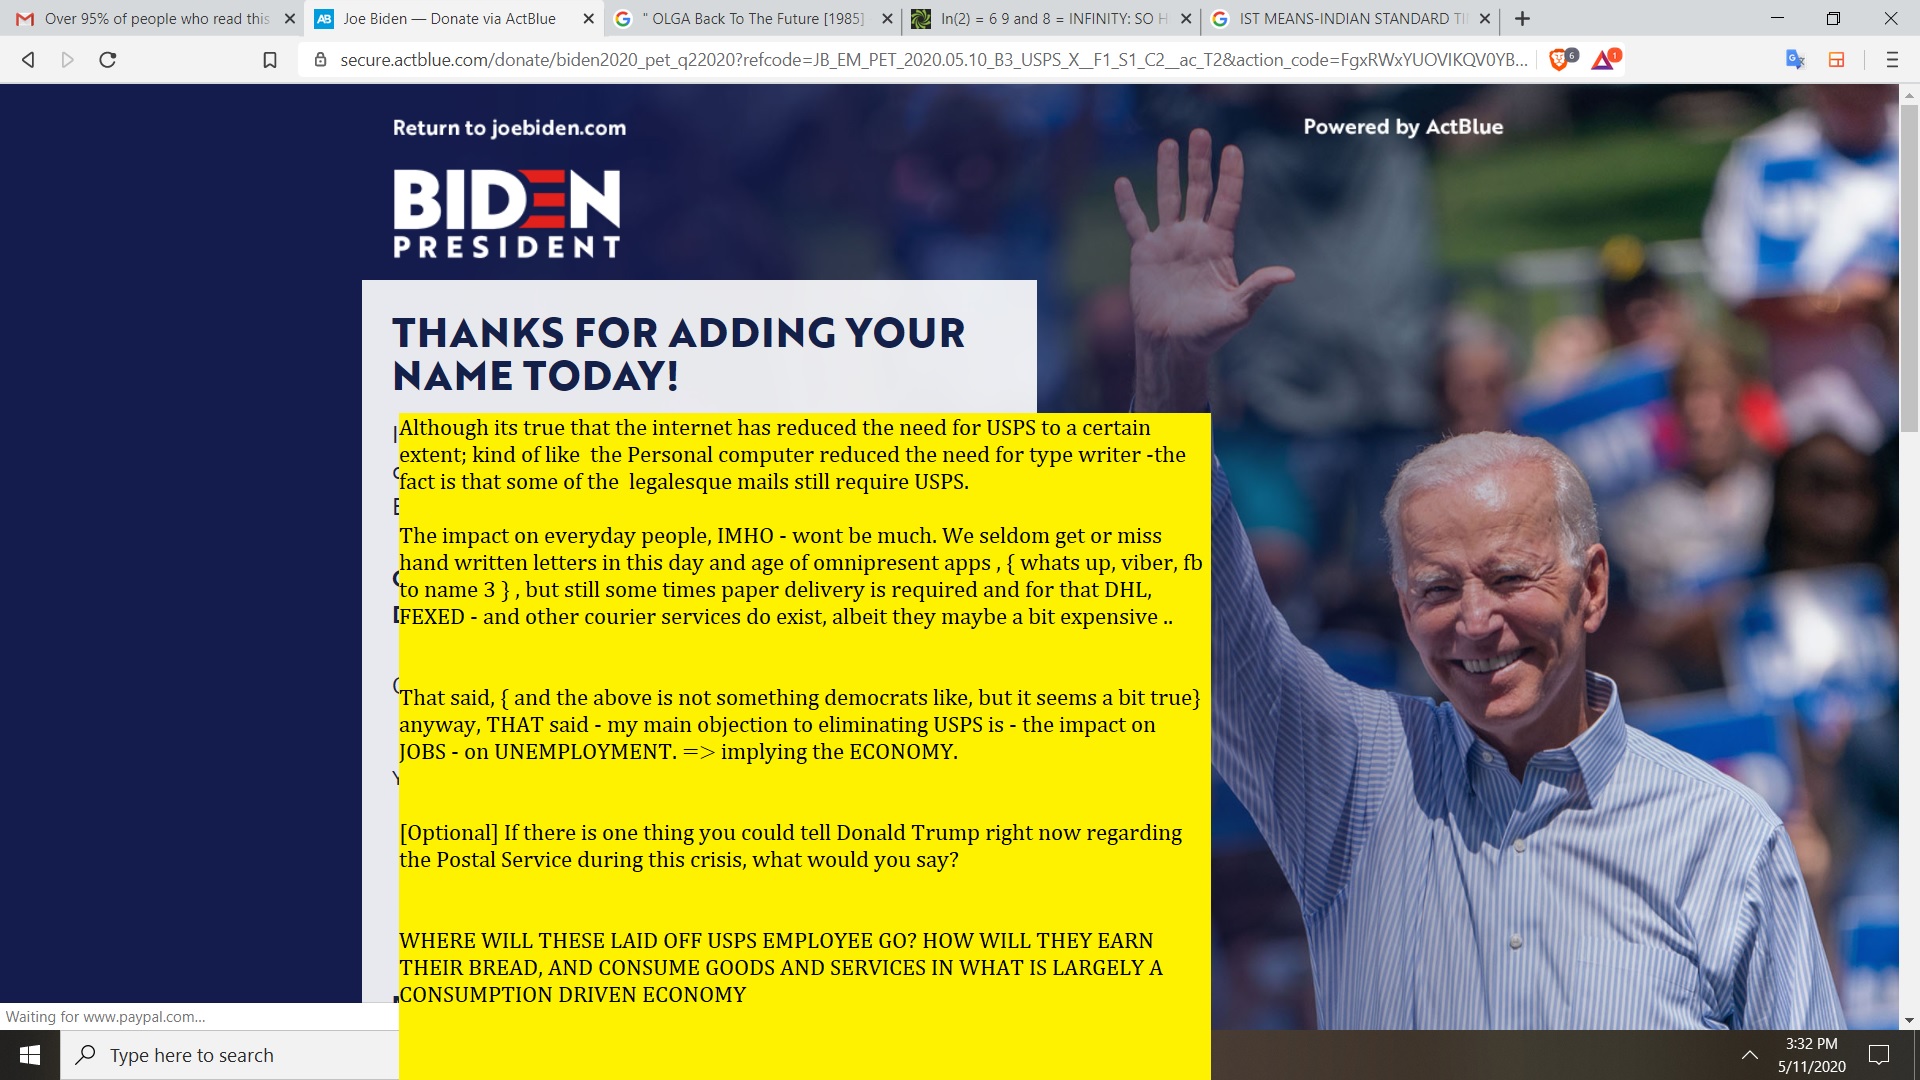 FROM AJAY MISHRA ON USPS EMAIL RESPONSE FOR JOE BIDEN